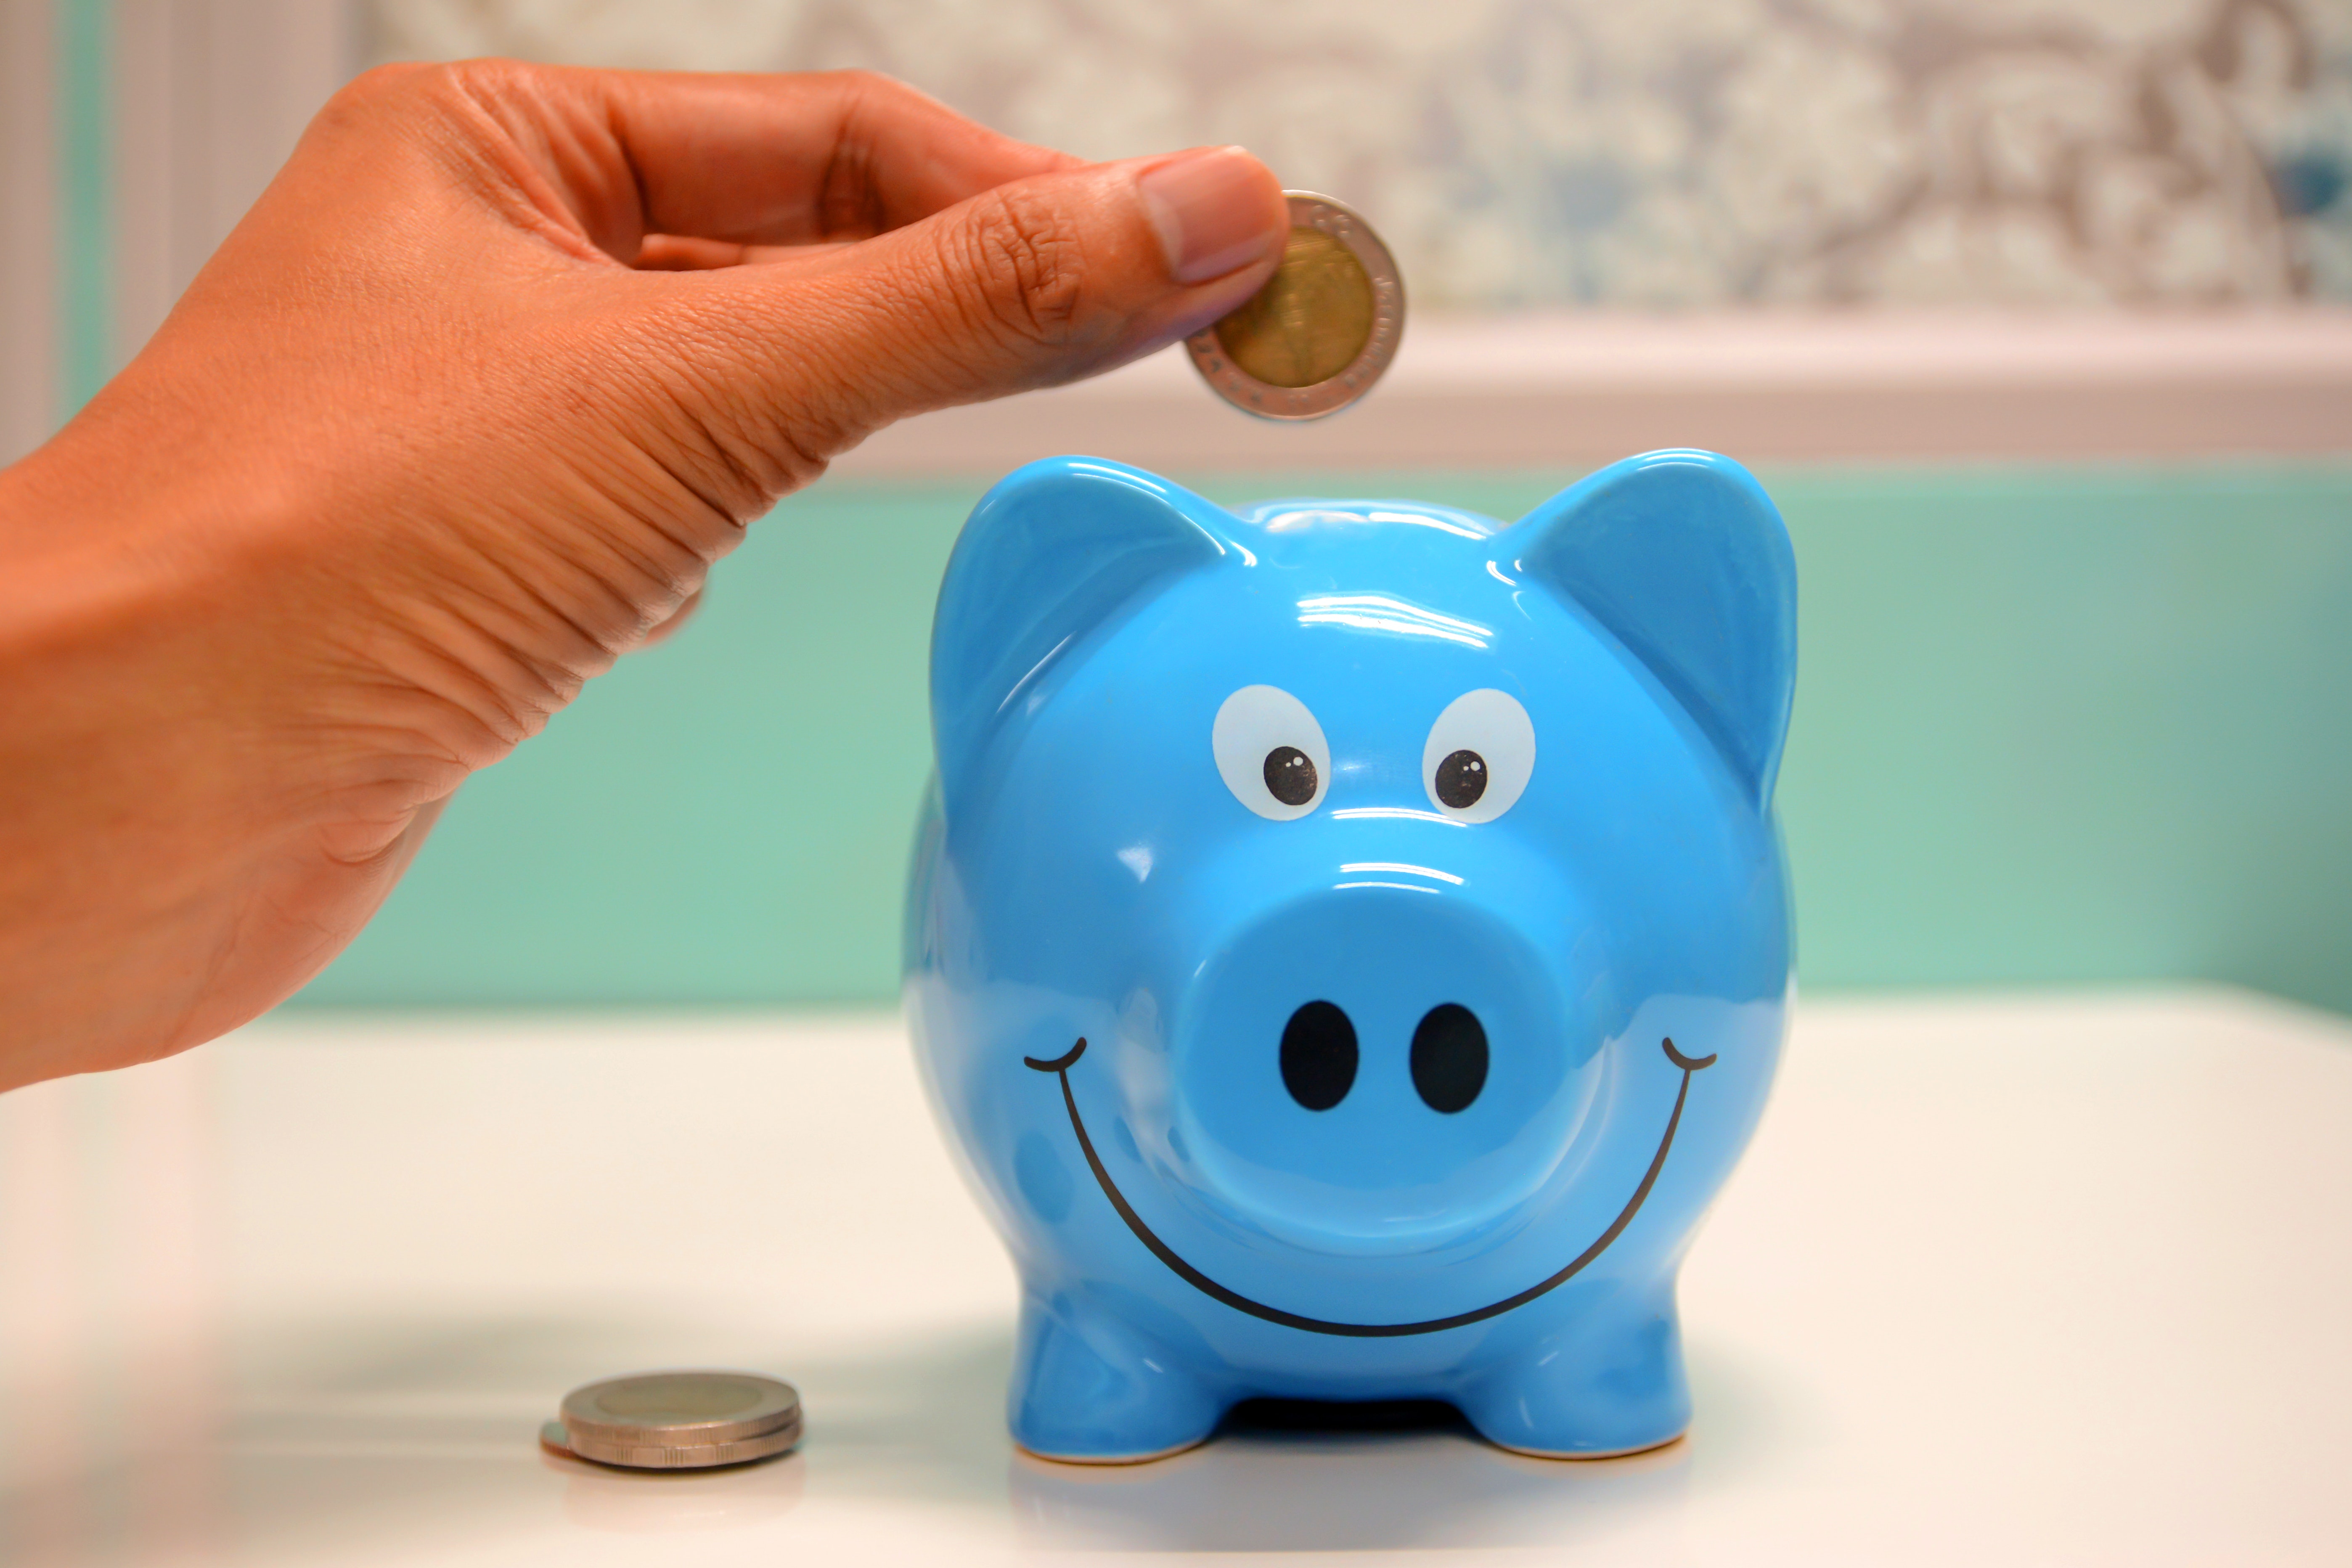 Putting money in a piggy bank to save up for dental crowns